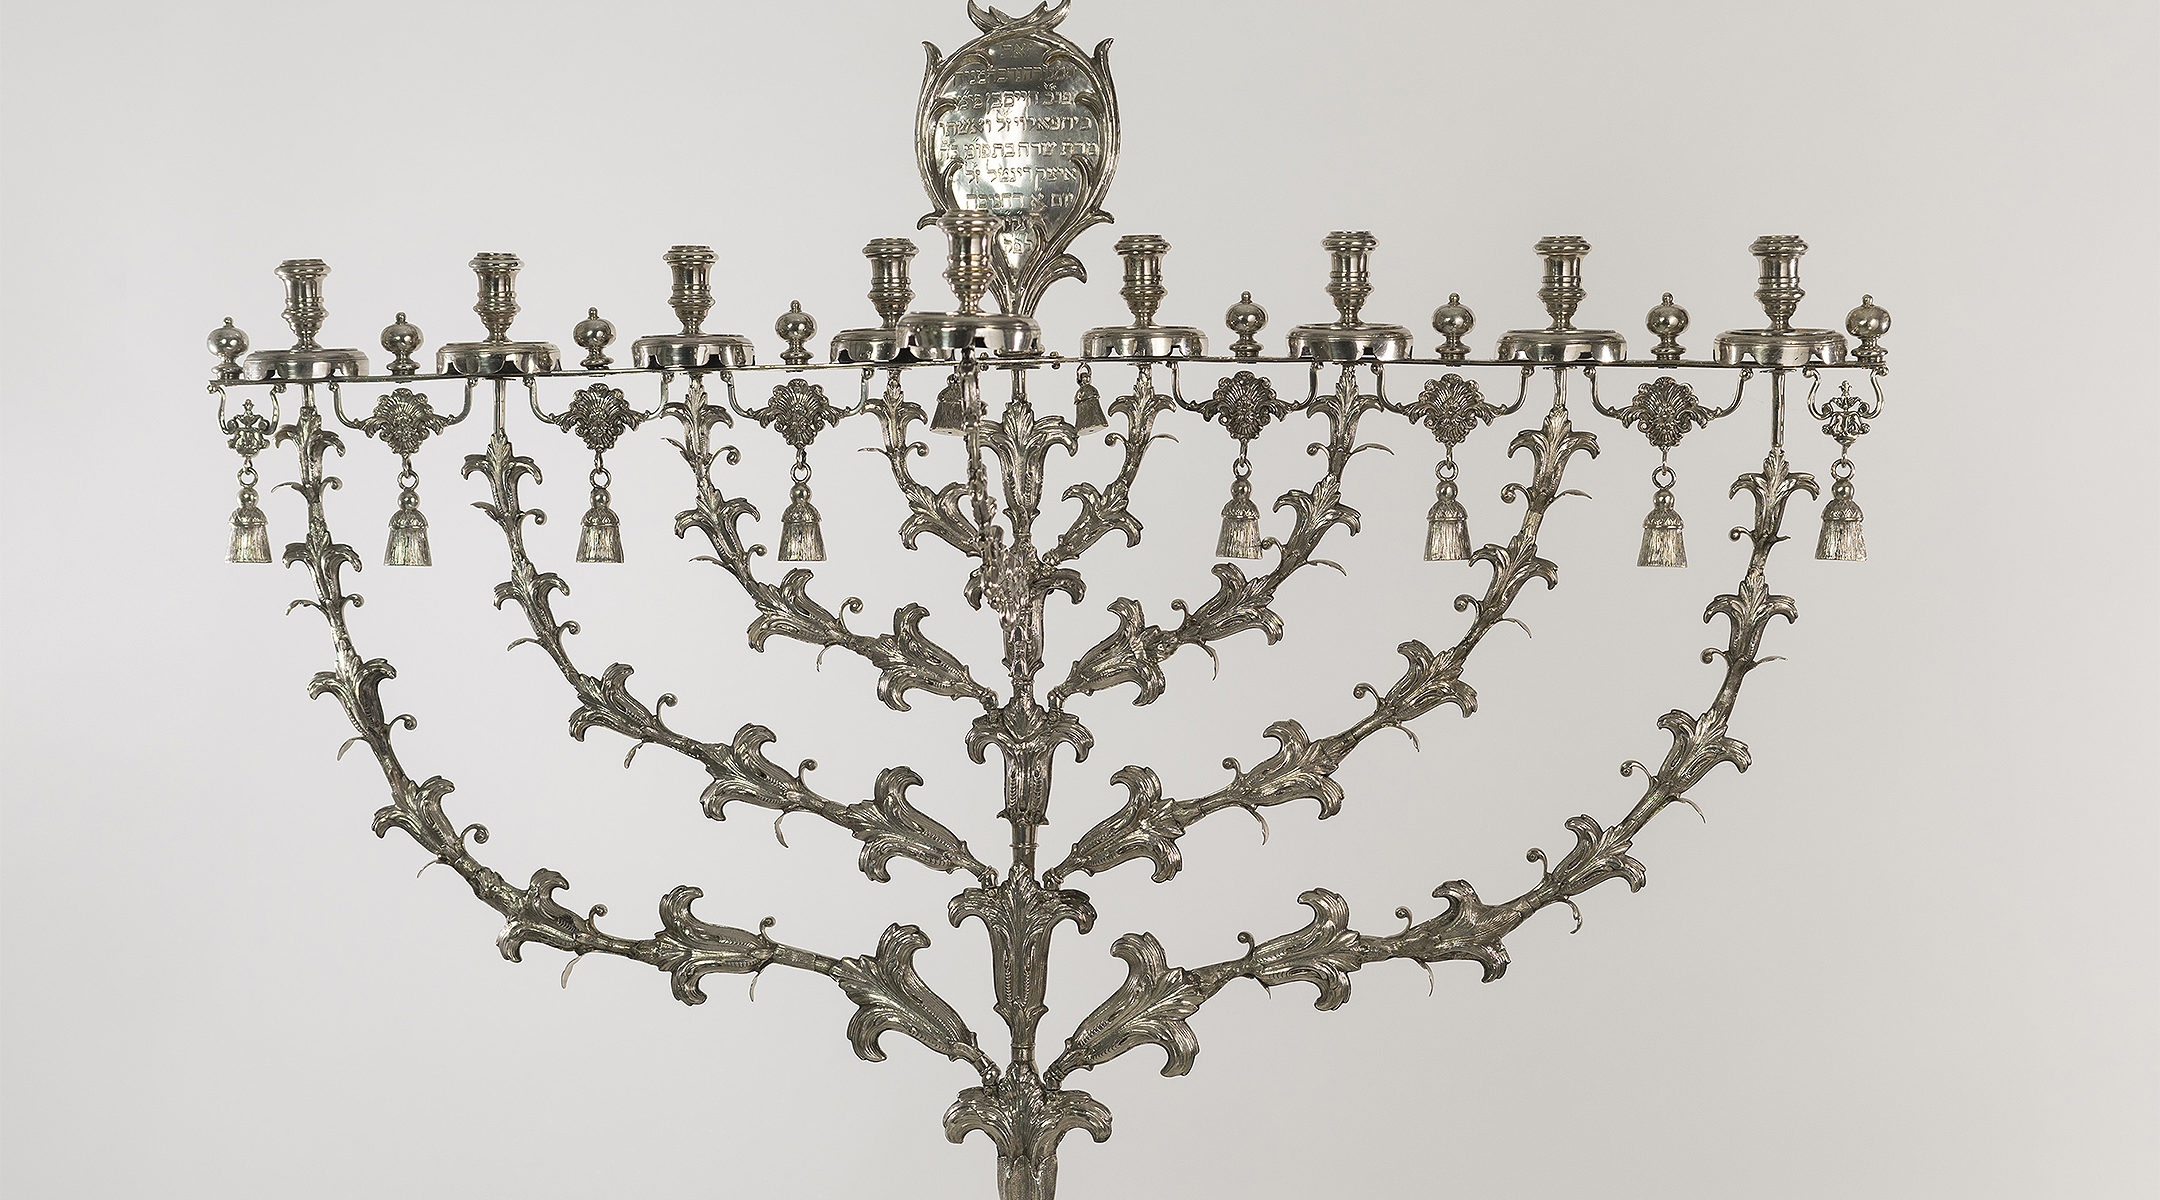 The Rintel Menorah on display at the Jewish Historical Museum of Amsterdam, the Netherlands. (Courtesy of the Jewish Cultural Quarter/JCK)